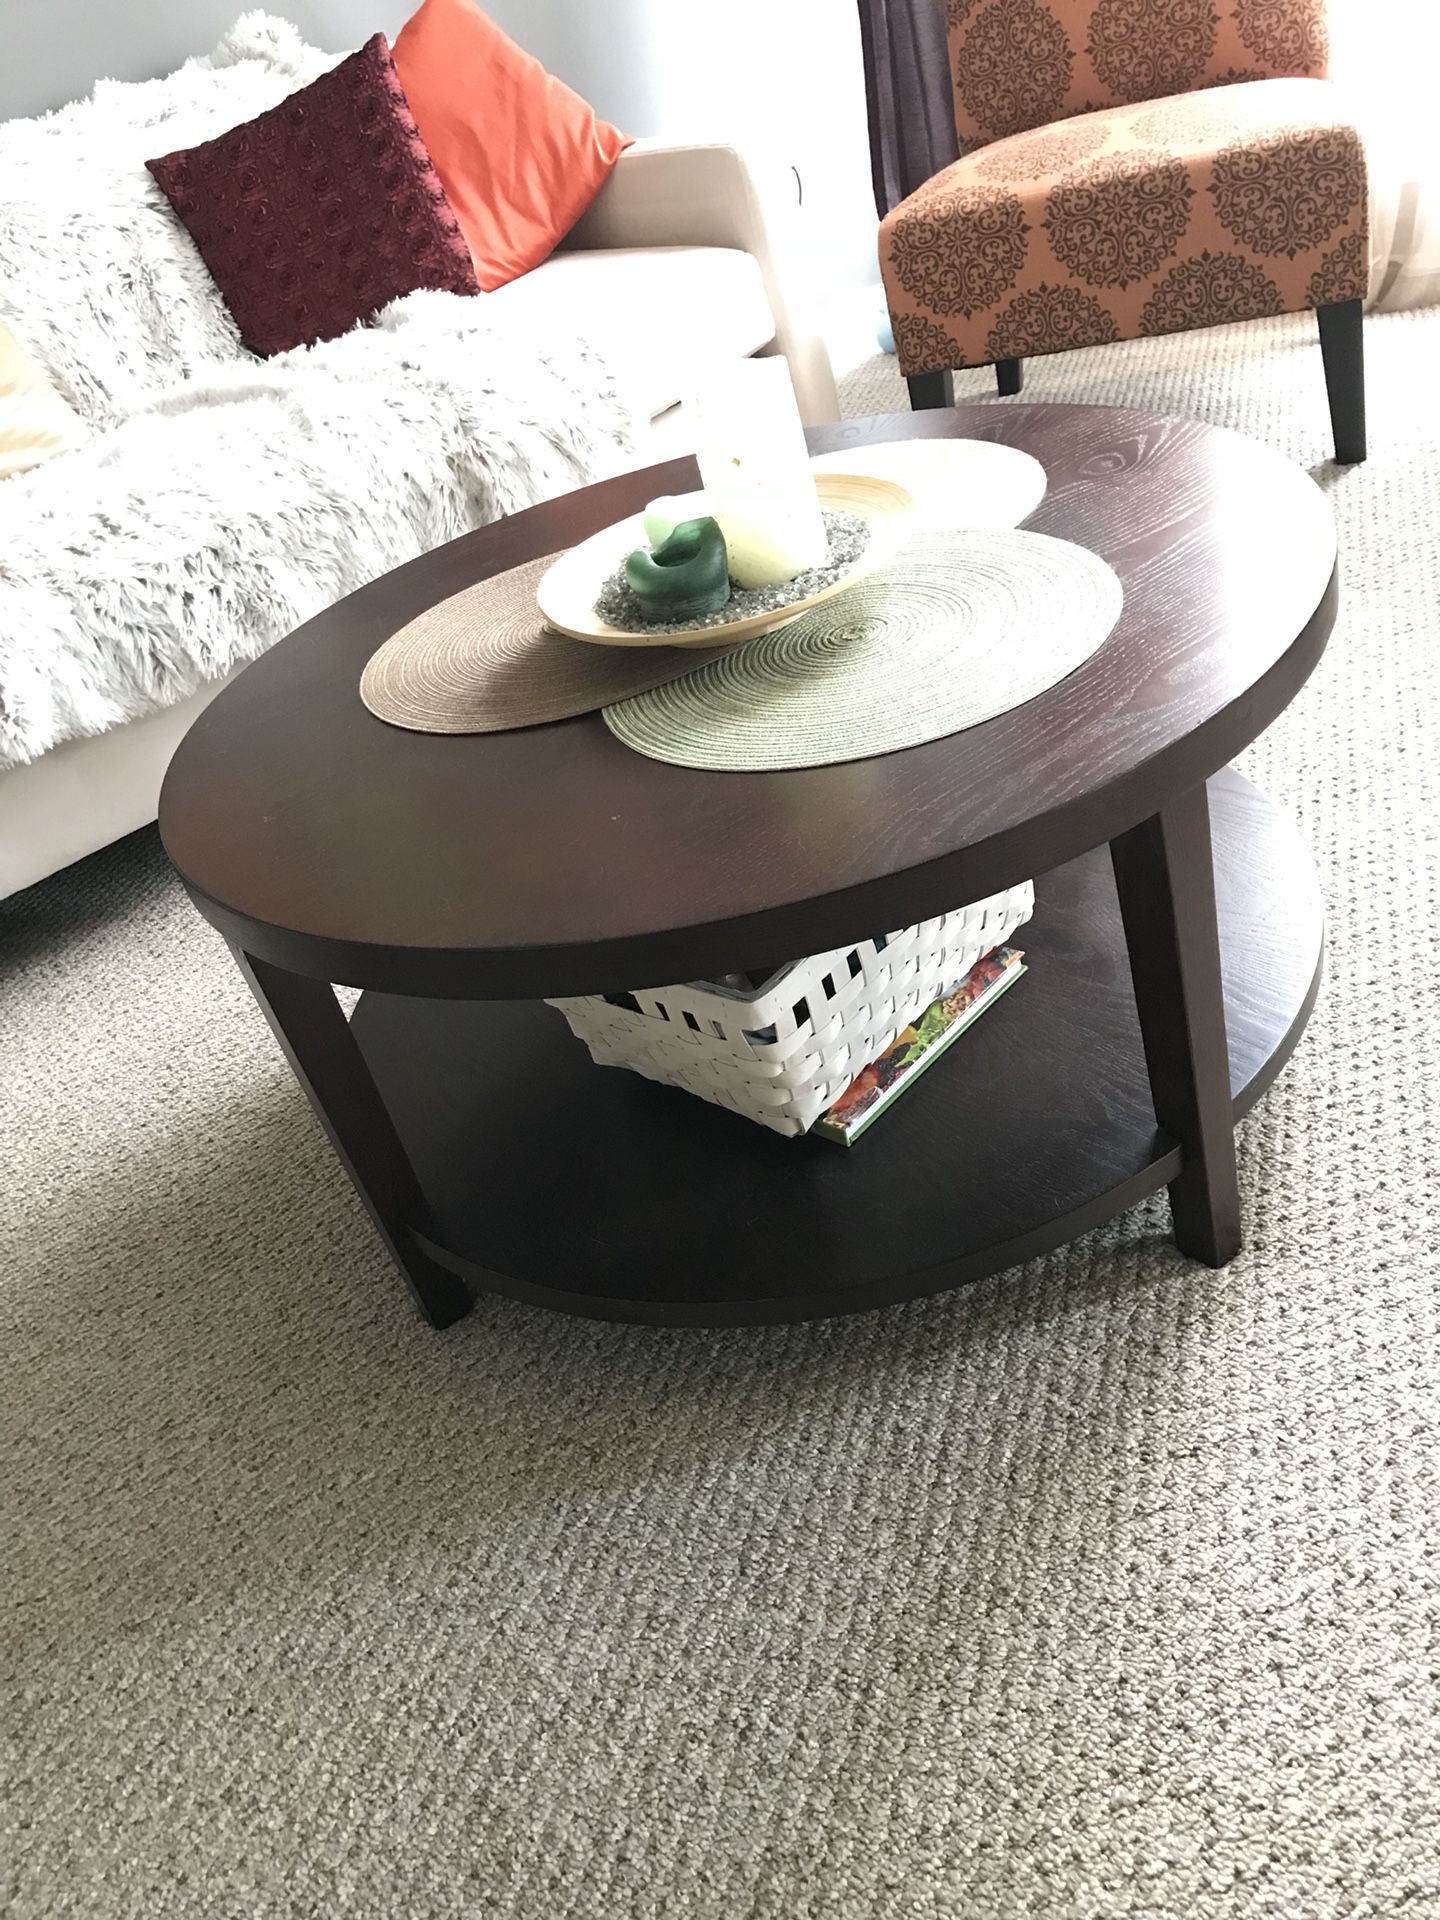 Coffee and end table set